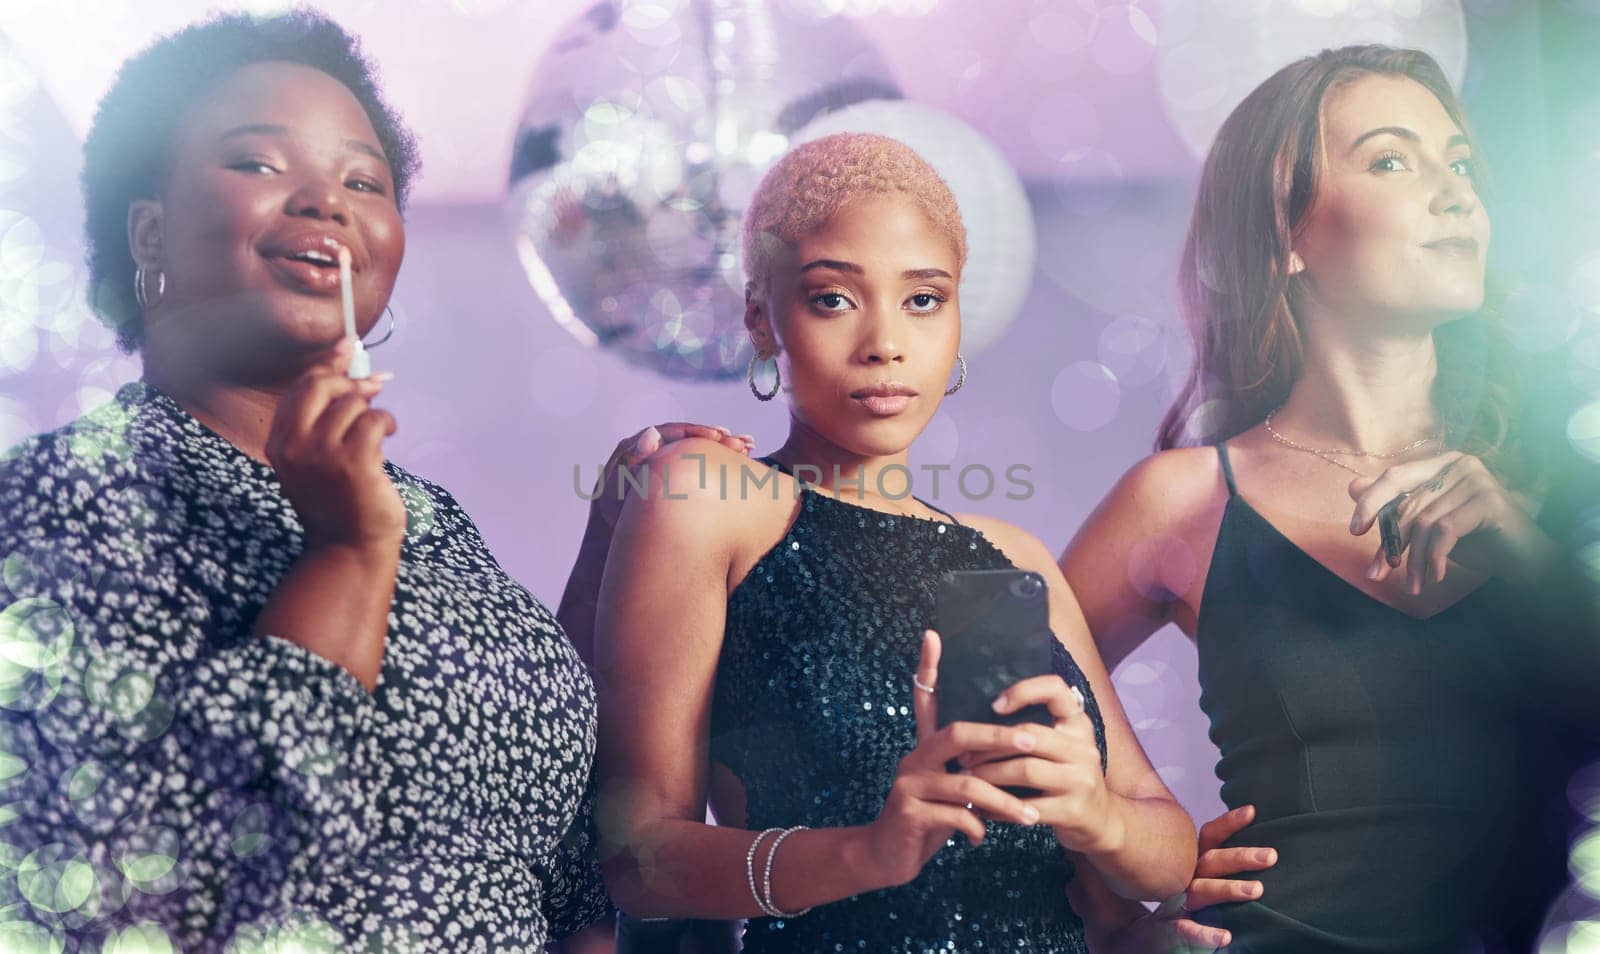 Women friends, nightclub and makeup portrait with phone, excited face and glitter aesthetic by light. Culture celebration, disco and gen z woman with diversity, freedom and cosmetic beauty at event.